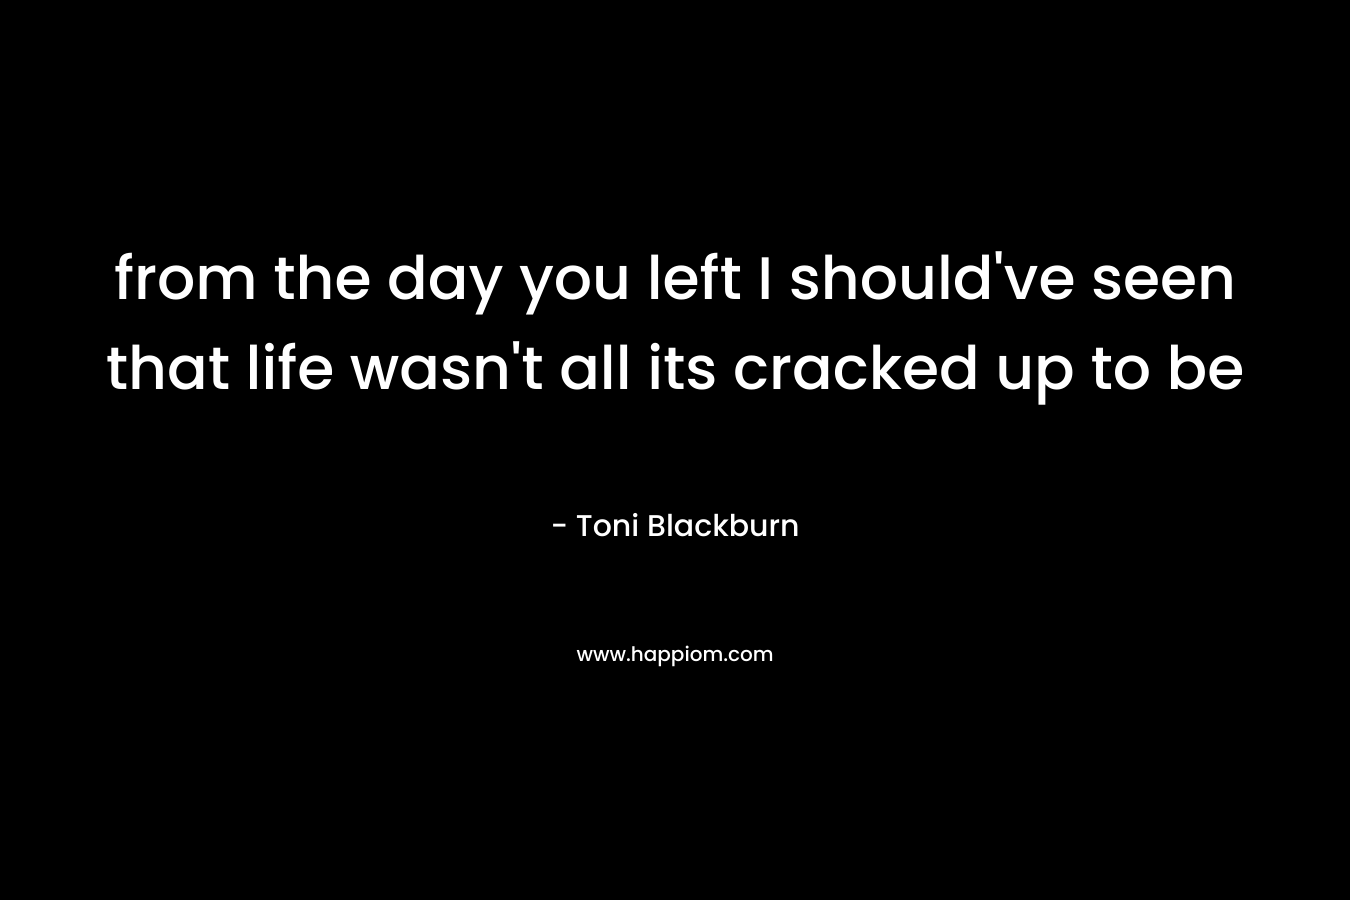 from the day you left I should’ve seen that life wasn’t all its cracked up to be – Toni Blackburn